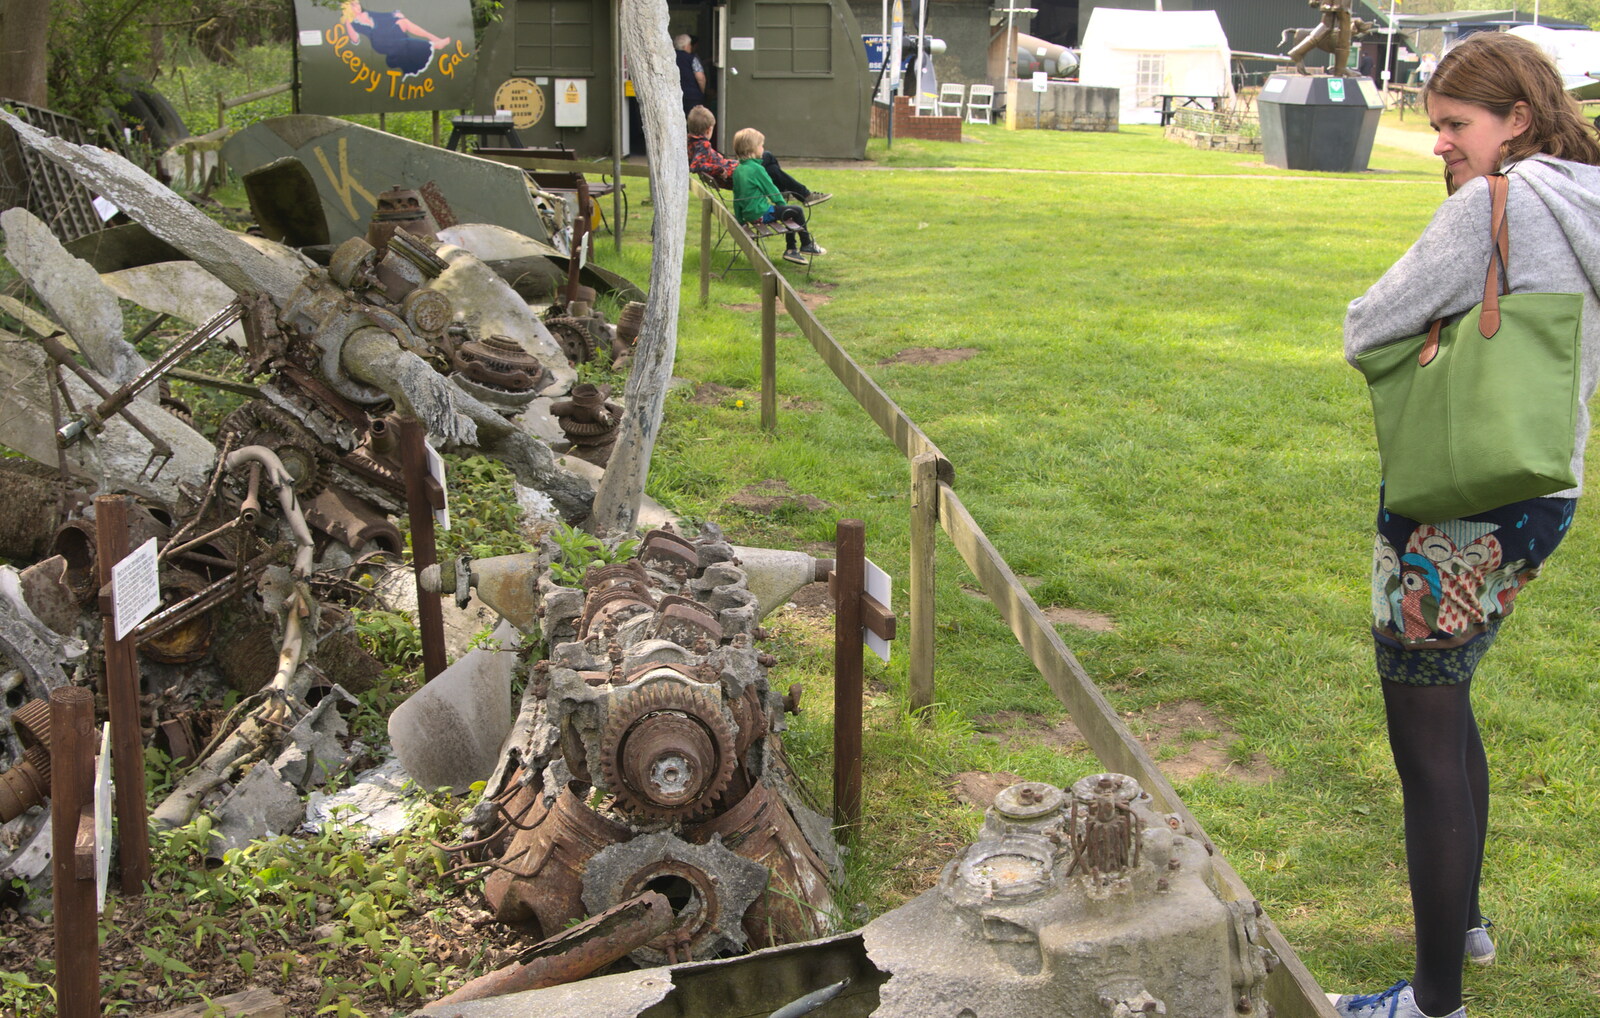 More mangled machinery from Norfolk and Suffolk Aviation Museum, Flixton, Suffolk - 30th April 2017